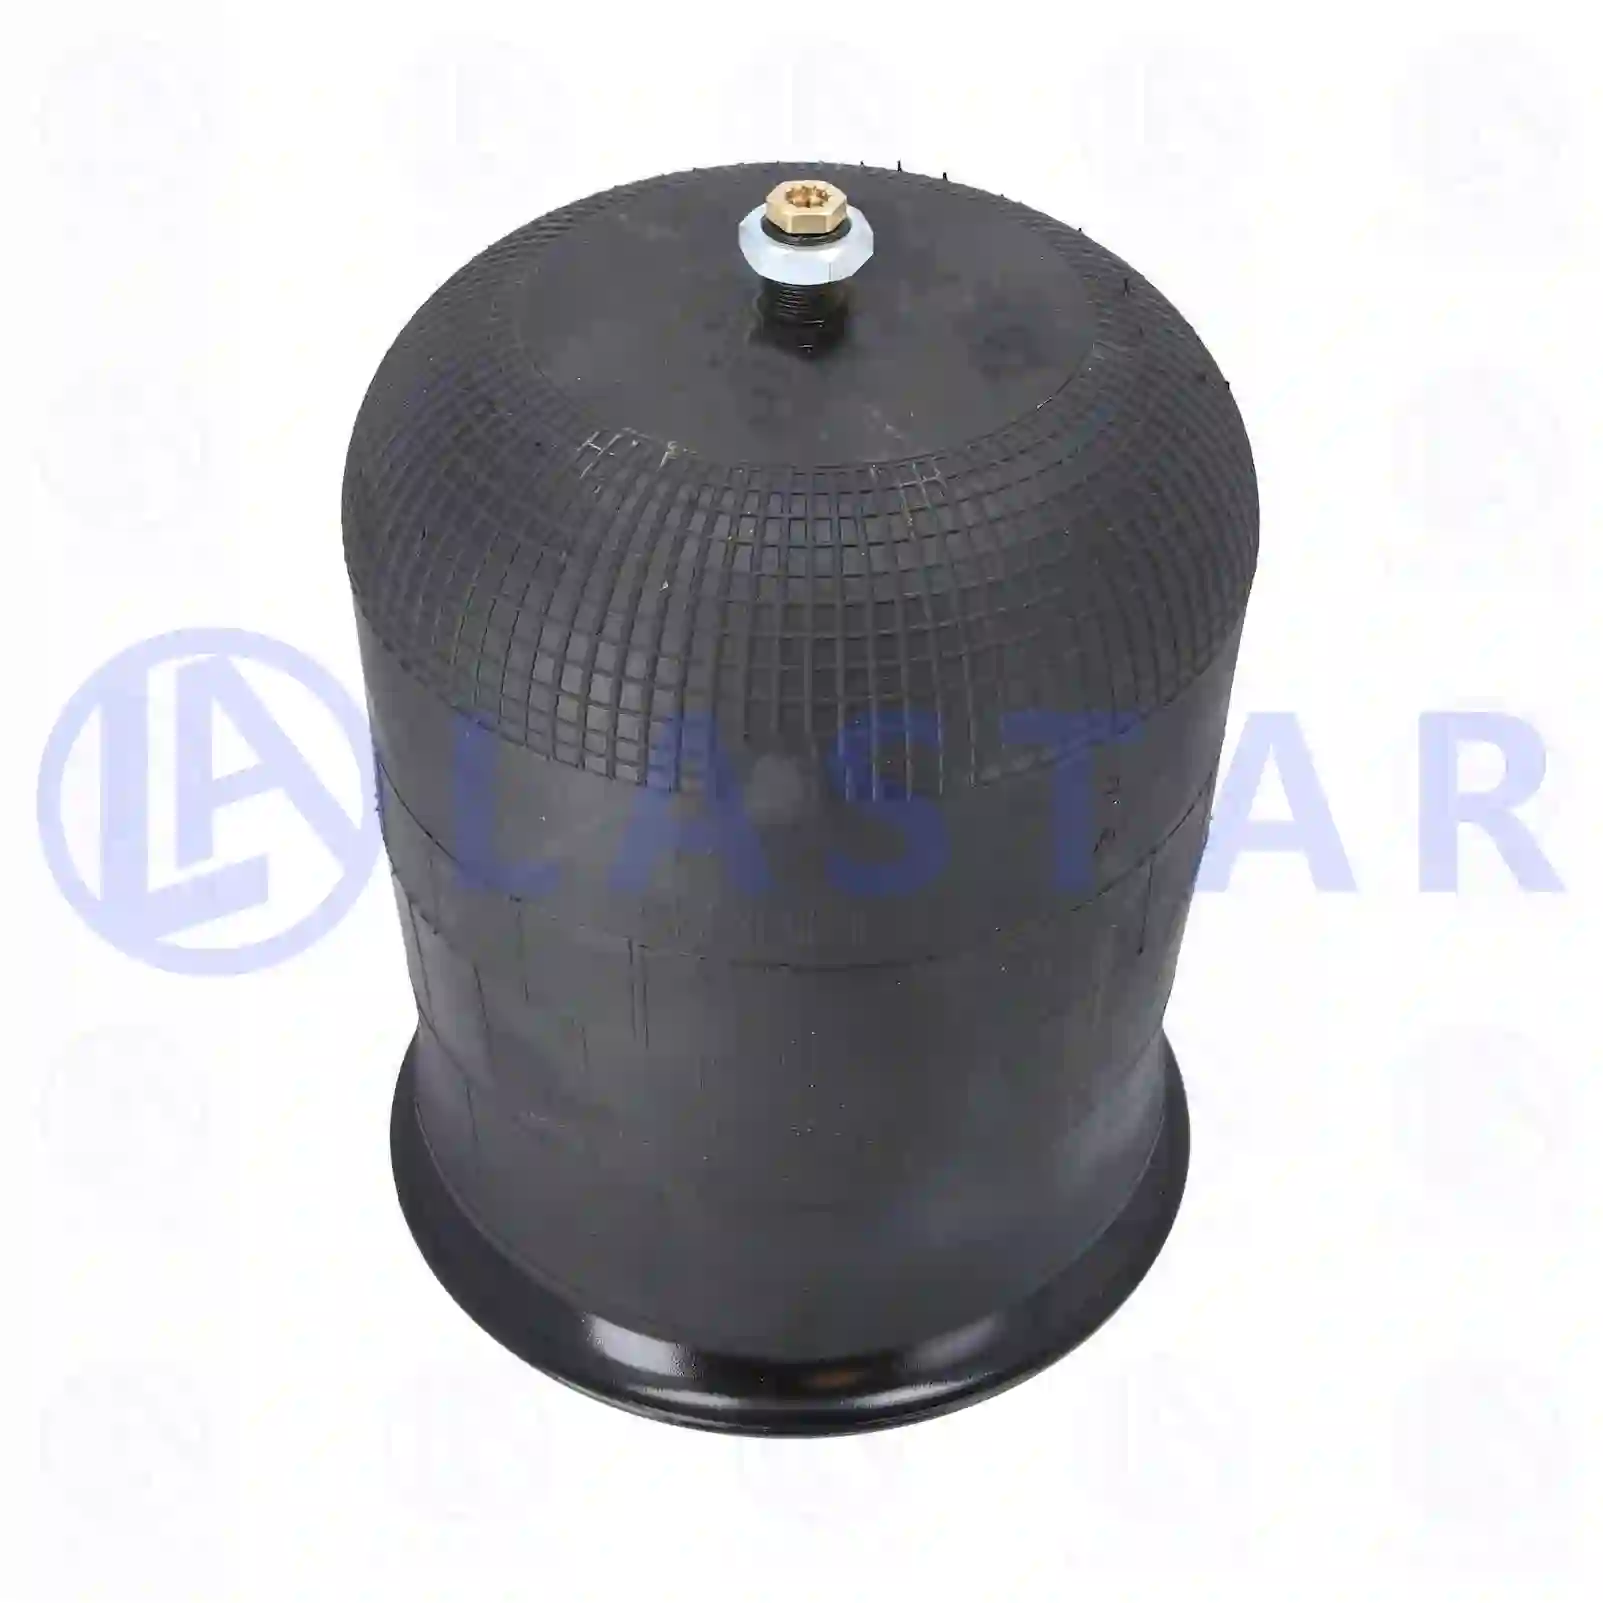 Air spring, with steel piston, 77728226, 9573200117, 9573200317, , ||  77728226 Lastar Spare Part | Truck Spare Parts, Auotomotive Spare Parts Air spring, with steel piston, 77728226, 9573200117, 9573200317, , ||  77728226 Lastar Spare Part | Truck Spare Parts, Auotomotive Spare Parts